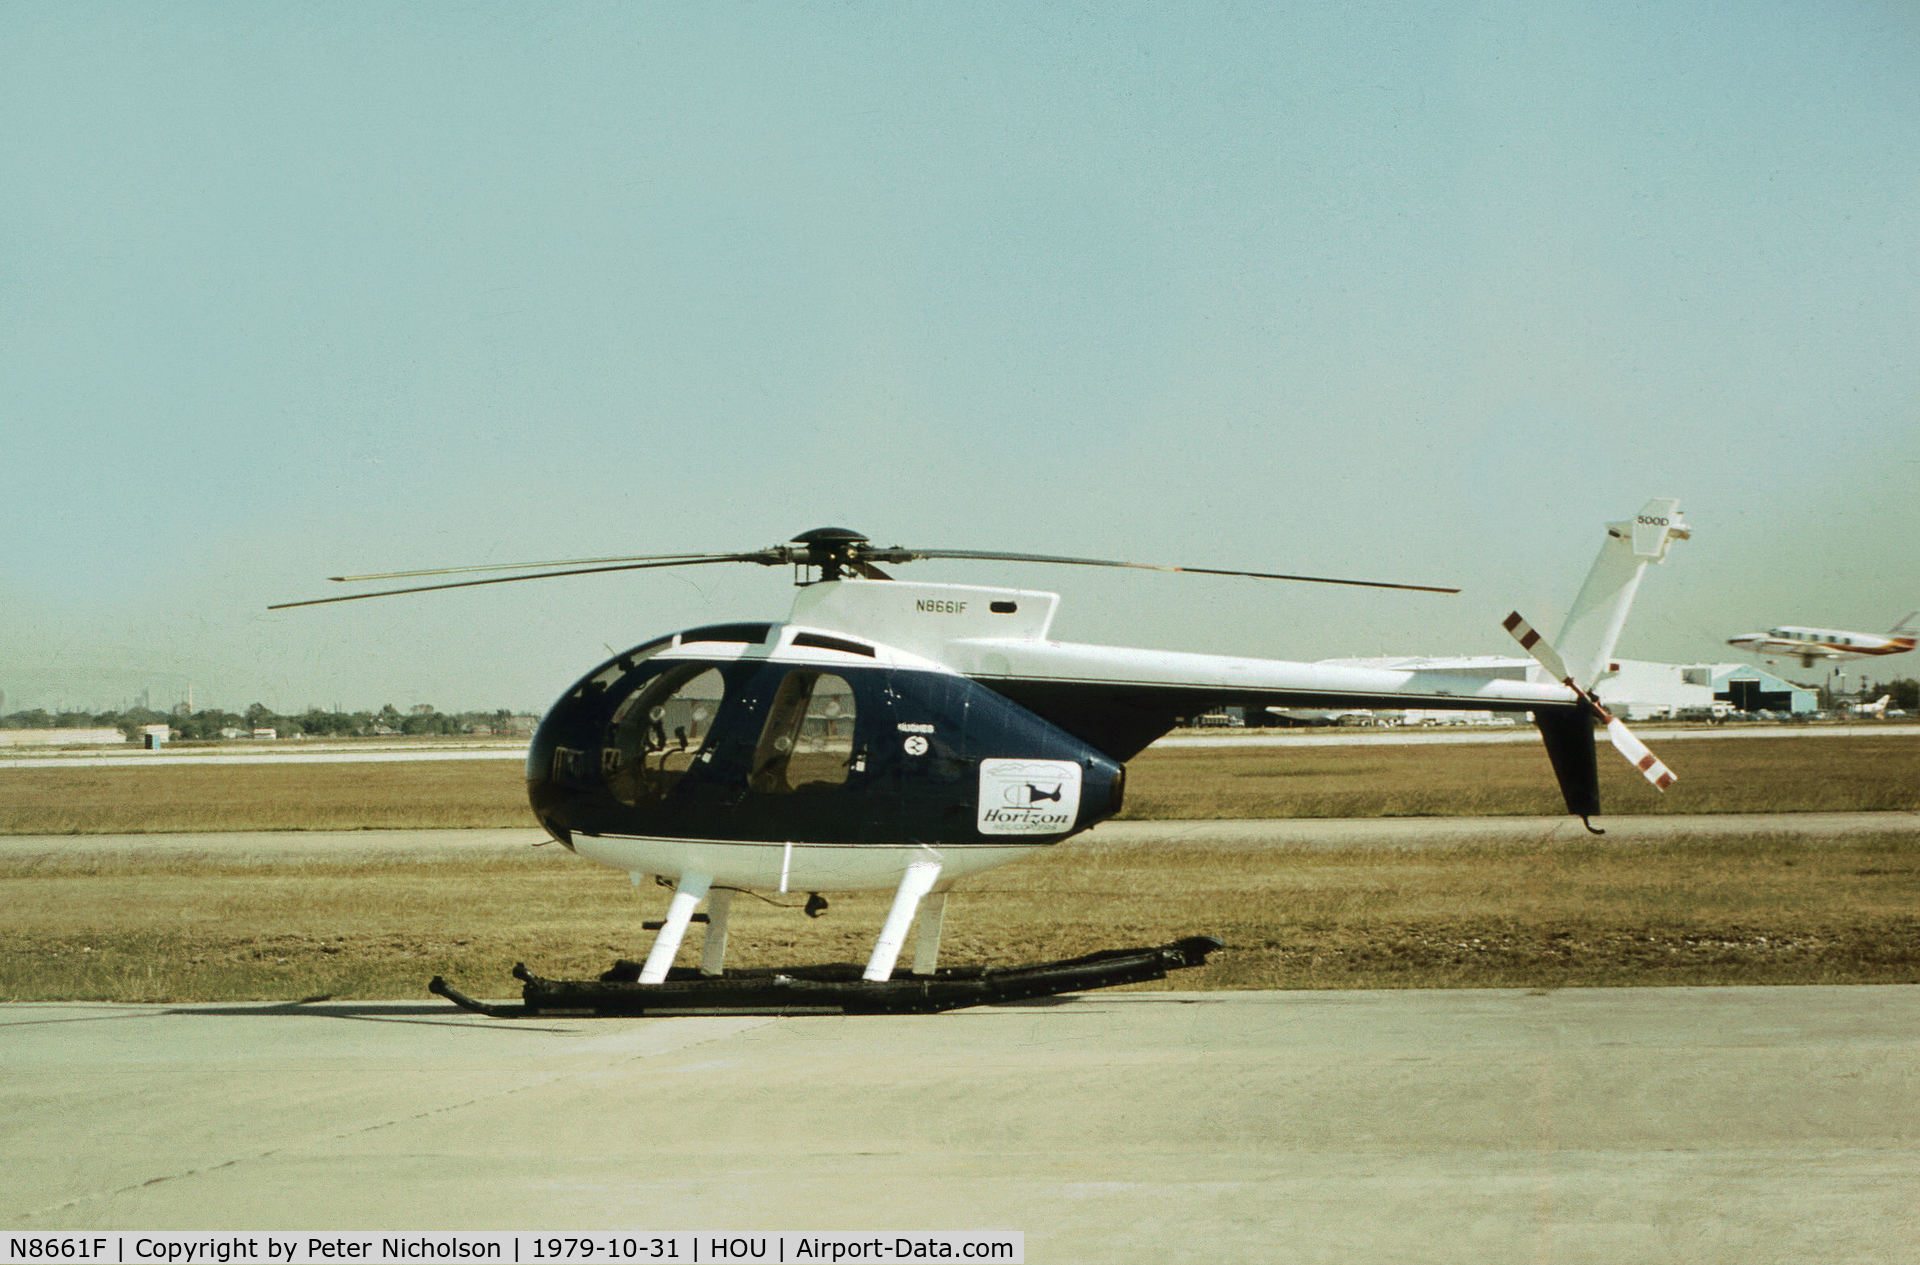 N8661F, Hughes 369D C/N 690522D, Hughes 500 of Horizon Helicopters as seen at Houston Hobby Airport in October 1979.